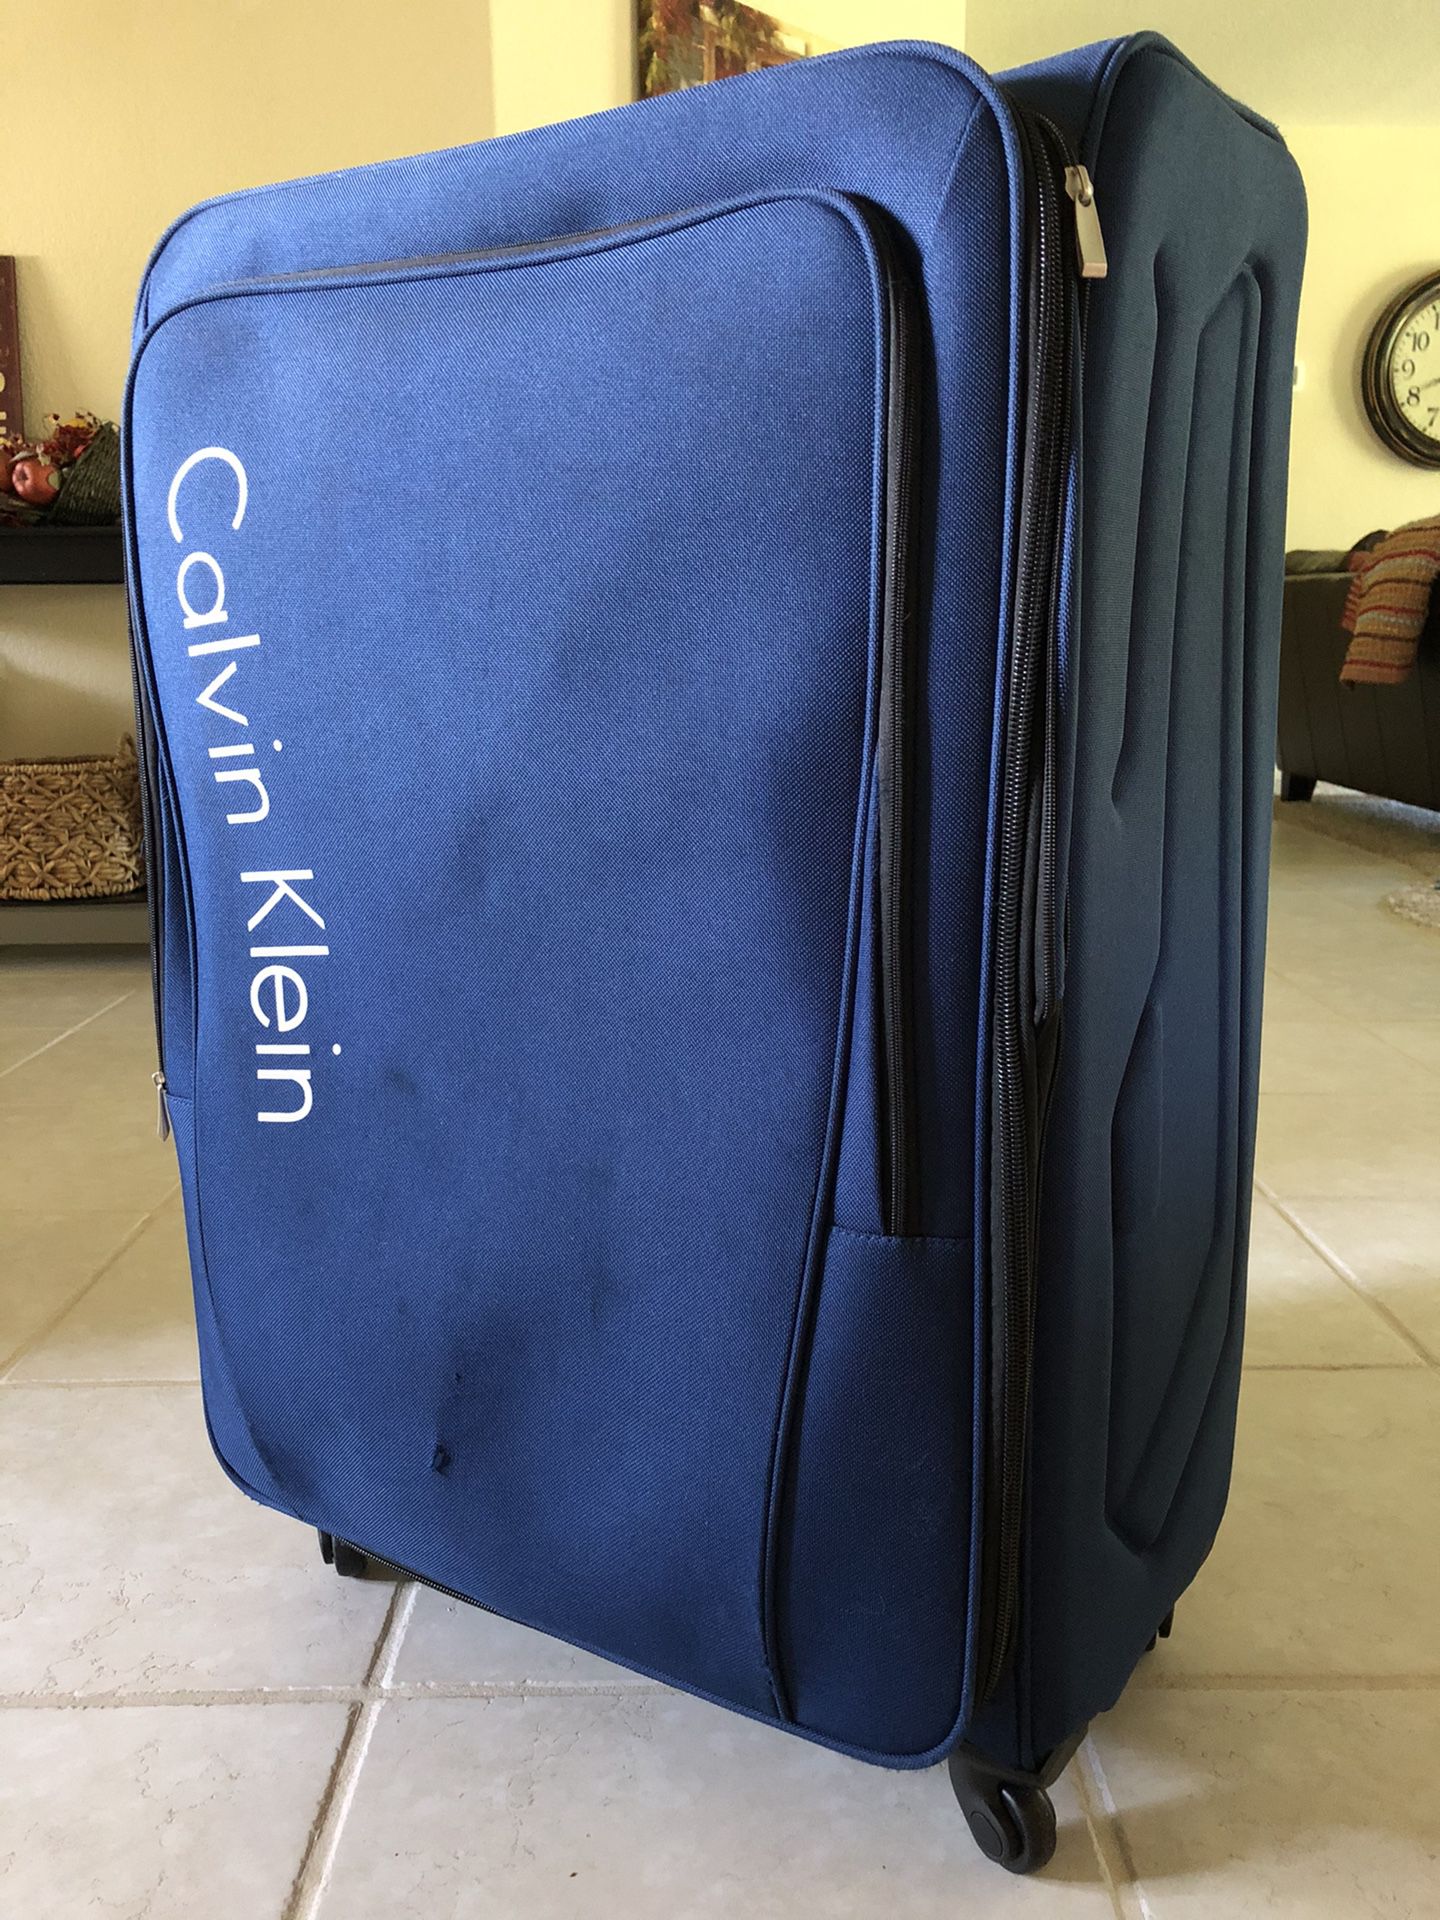 XL Calvin Klein Expandable Spinner Luggage. 34”H x 22.5” W x 12” D (Including wheels)